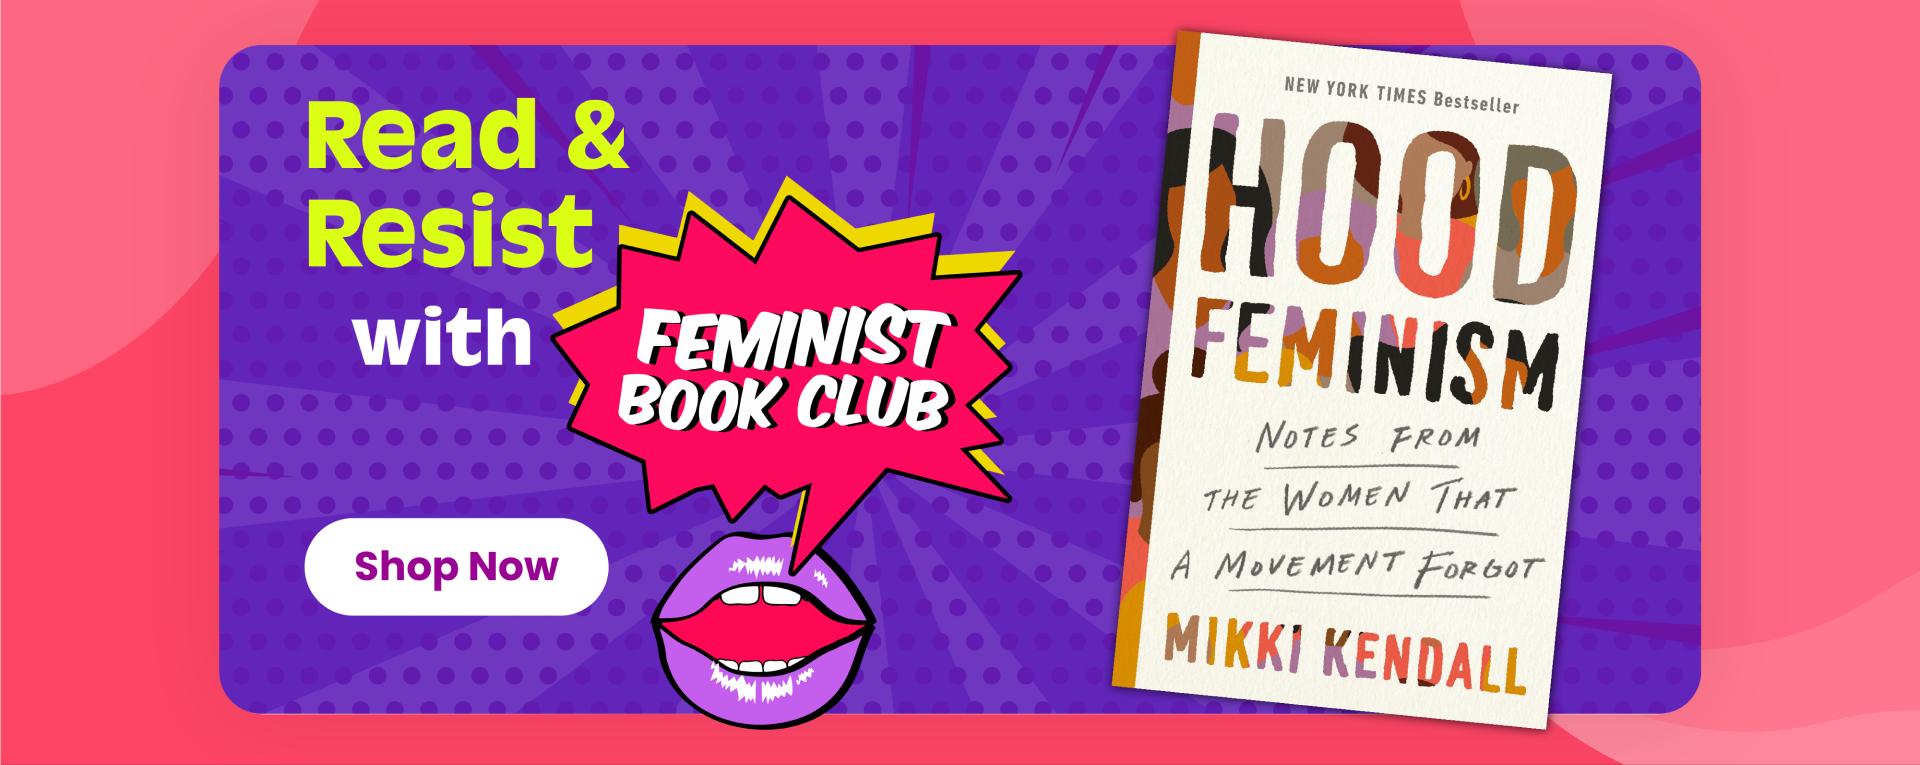 feminist book club women's day coupons 